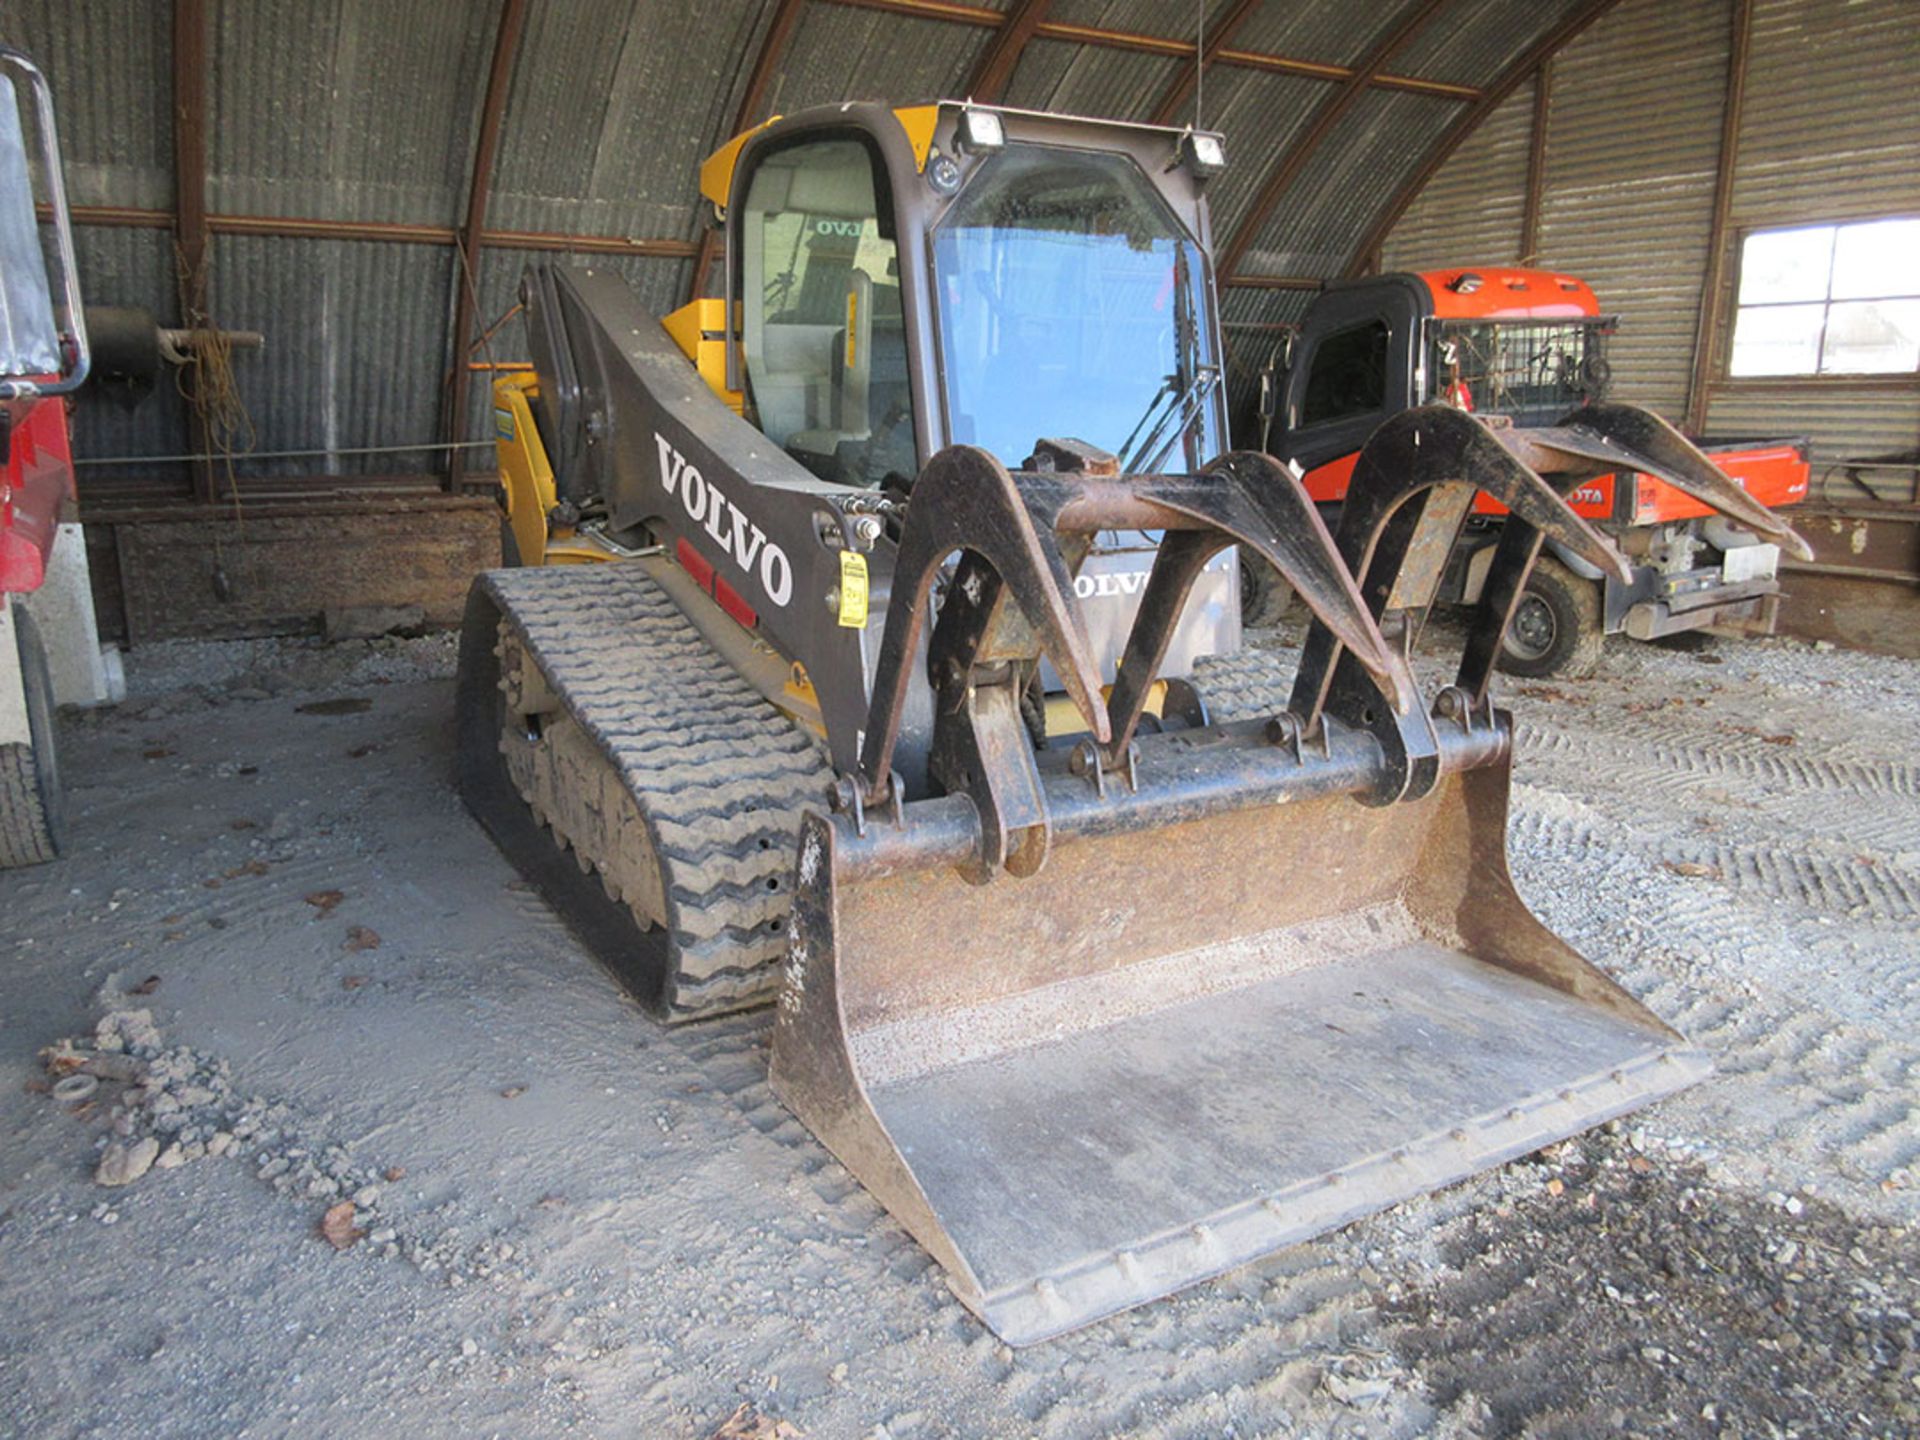 2012 VOLVO MCT 135C SKID STEER; PYRAMID RUBBER TRACTS, ARM REST STEERING, BUCKET CONTROL, FOOT PEDAL